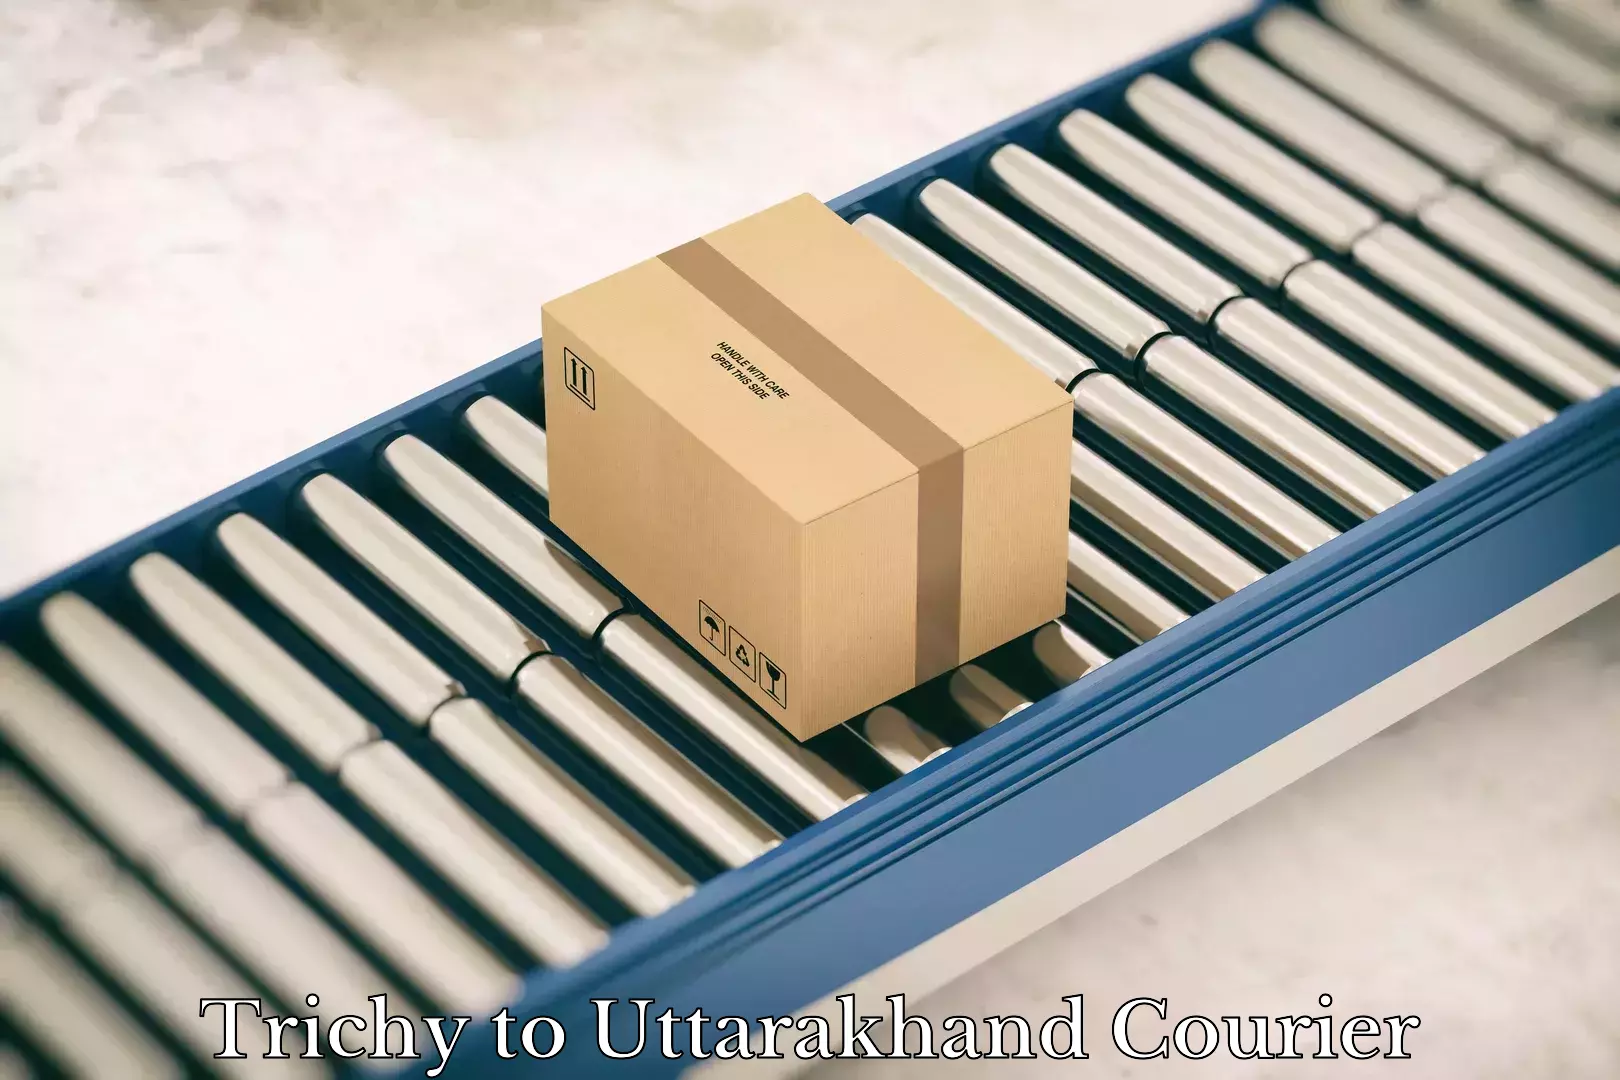 Round-the-clock parcel delivery in Trichy to Uttarakhand